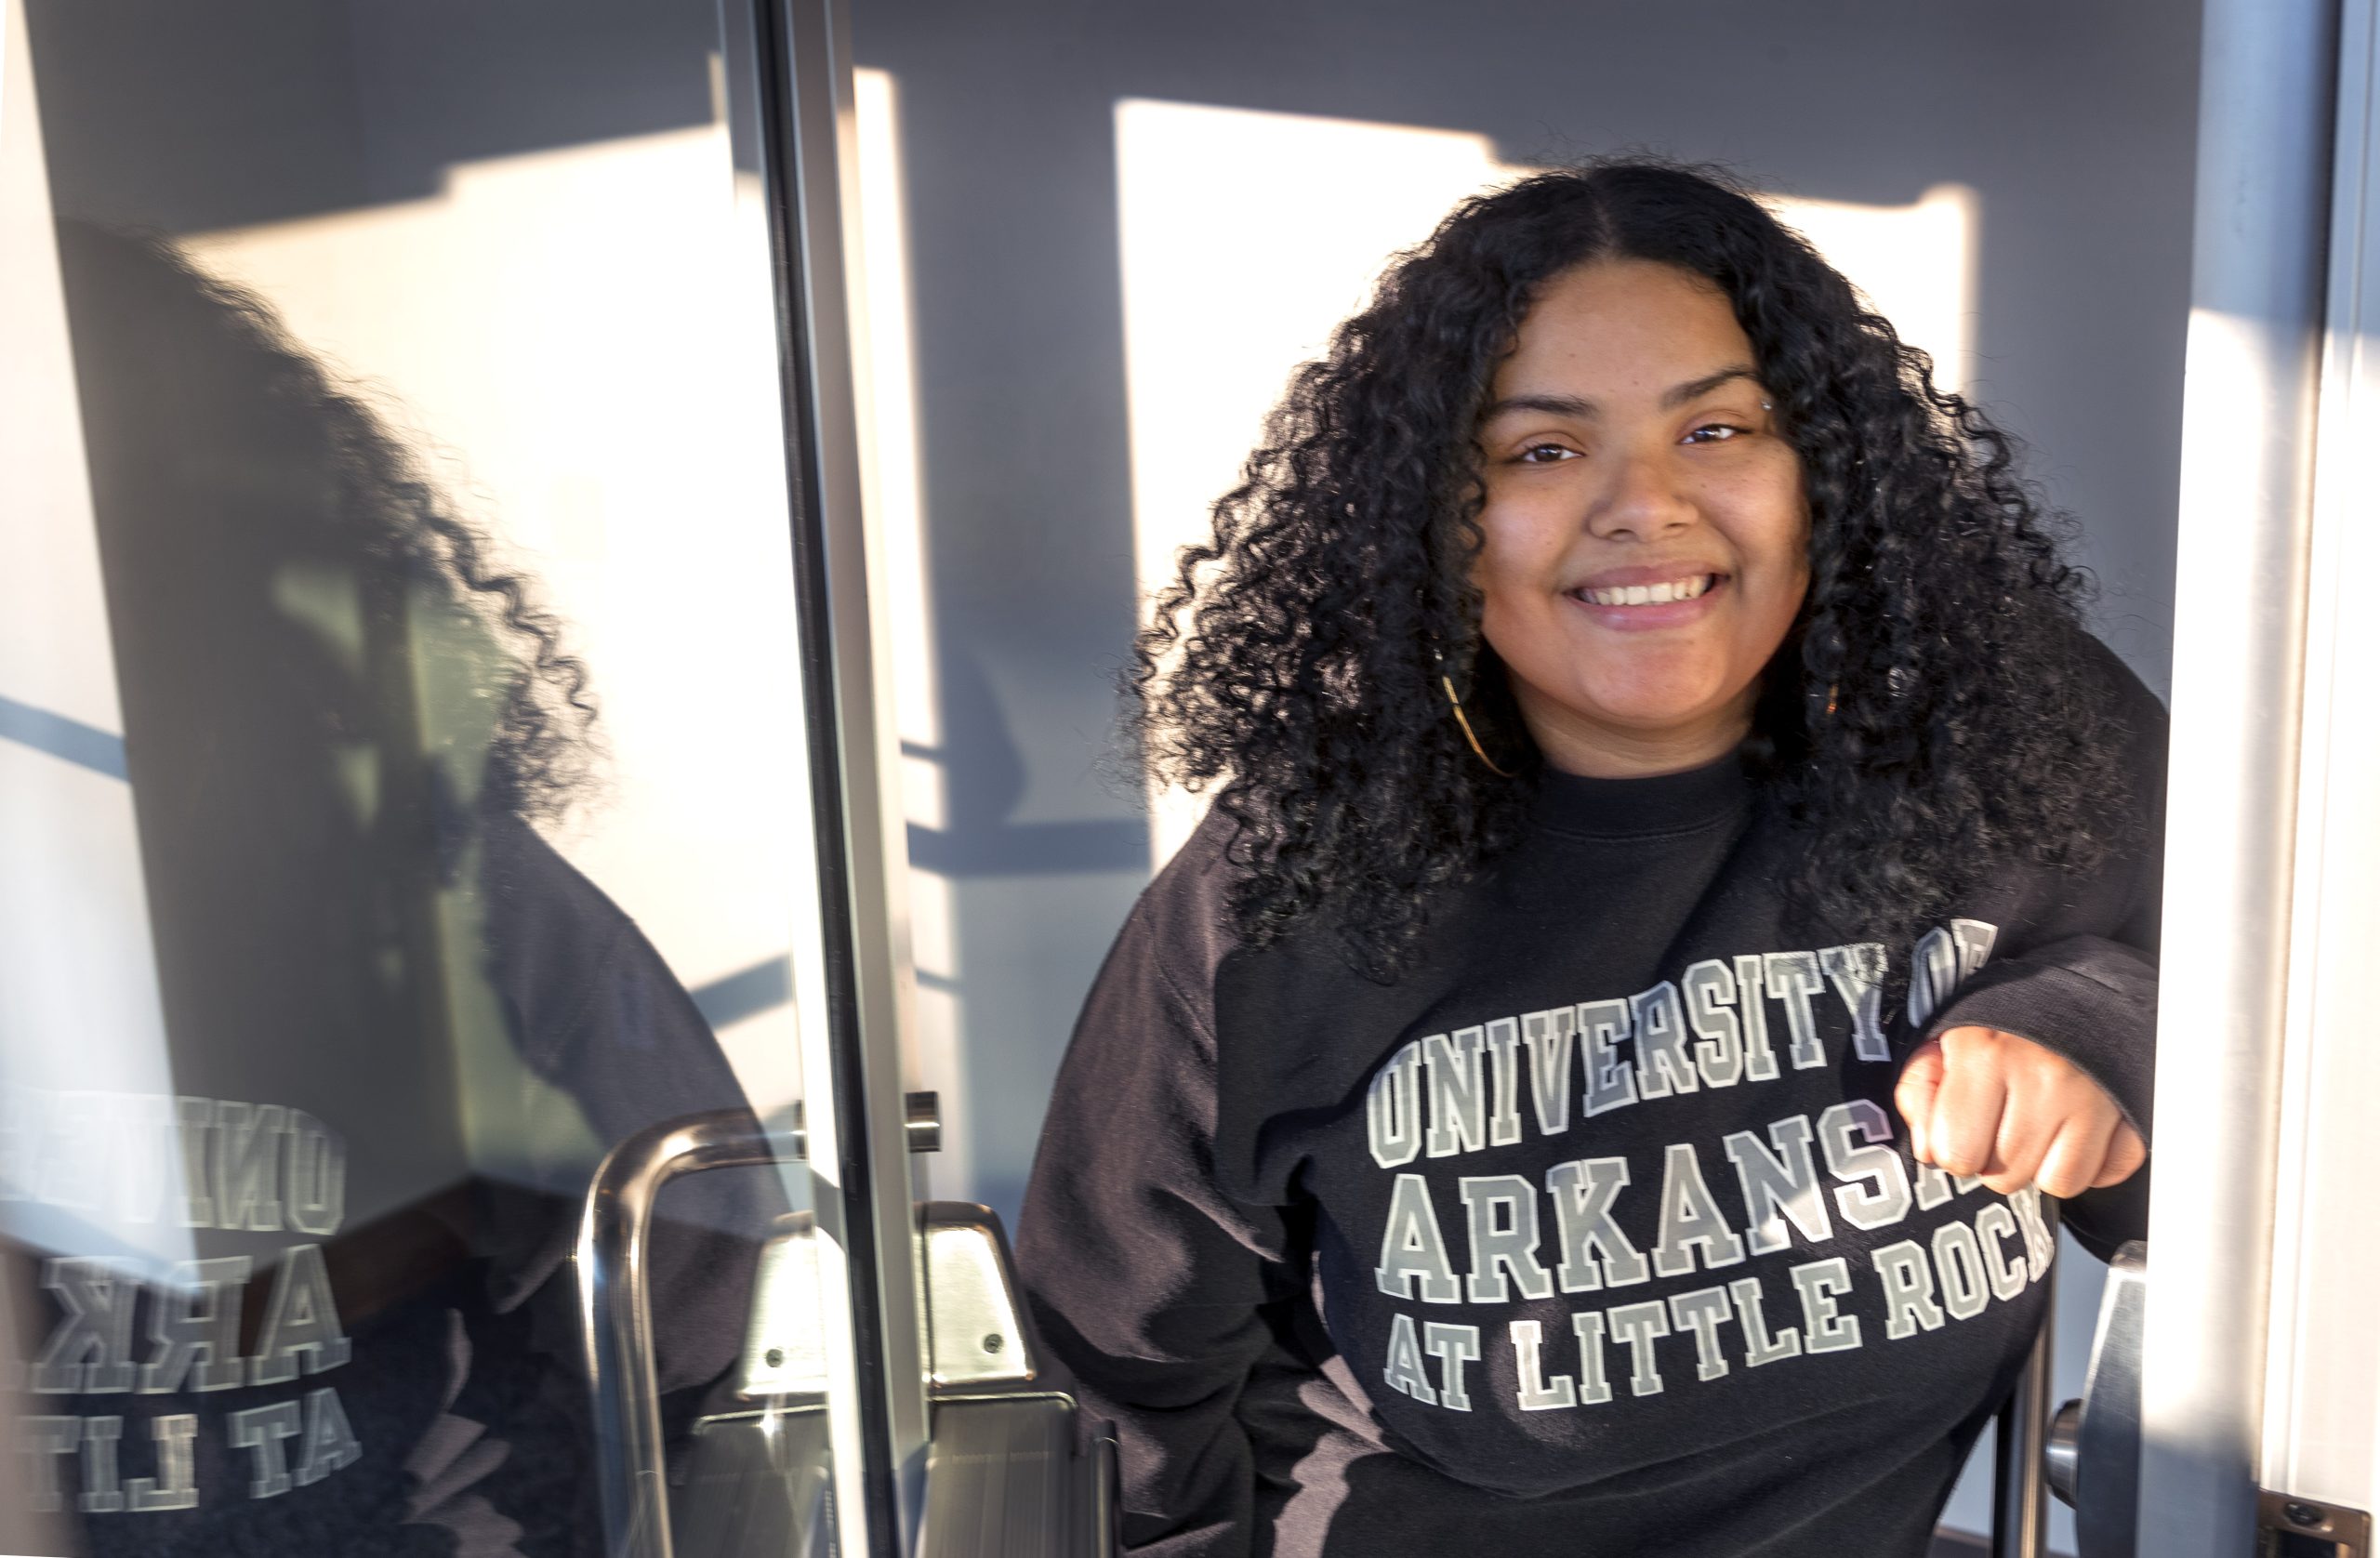 Infinity Wallace is a first-generation student who will graduate on Dec. 14 with a bachelor’s degree in criminal justice. She graduated this past May with a bachelor’s degree in social work, and is currently enrolled in the Master of Social Work program.